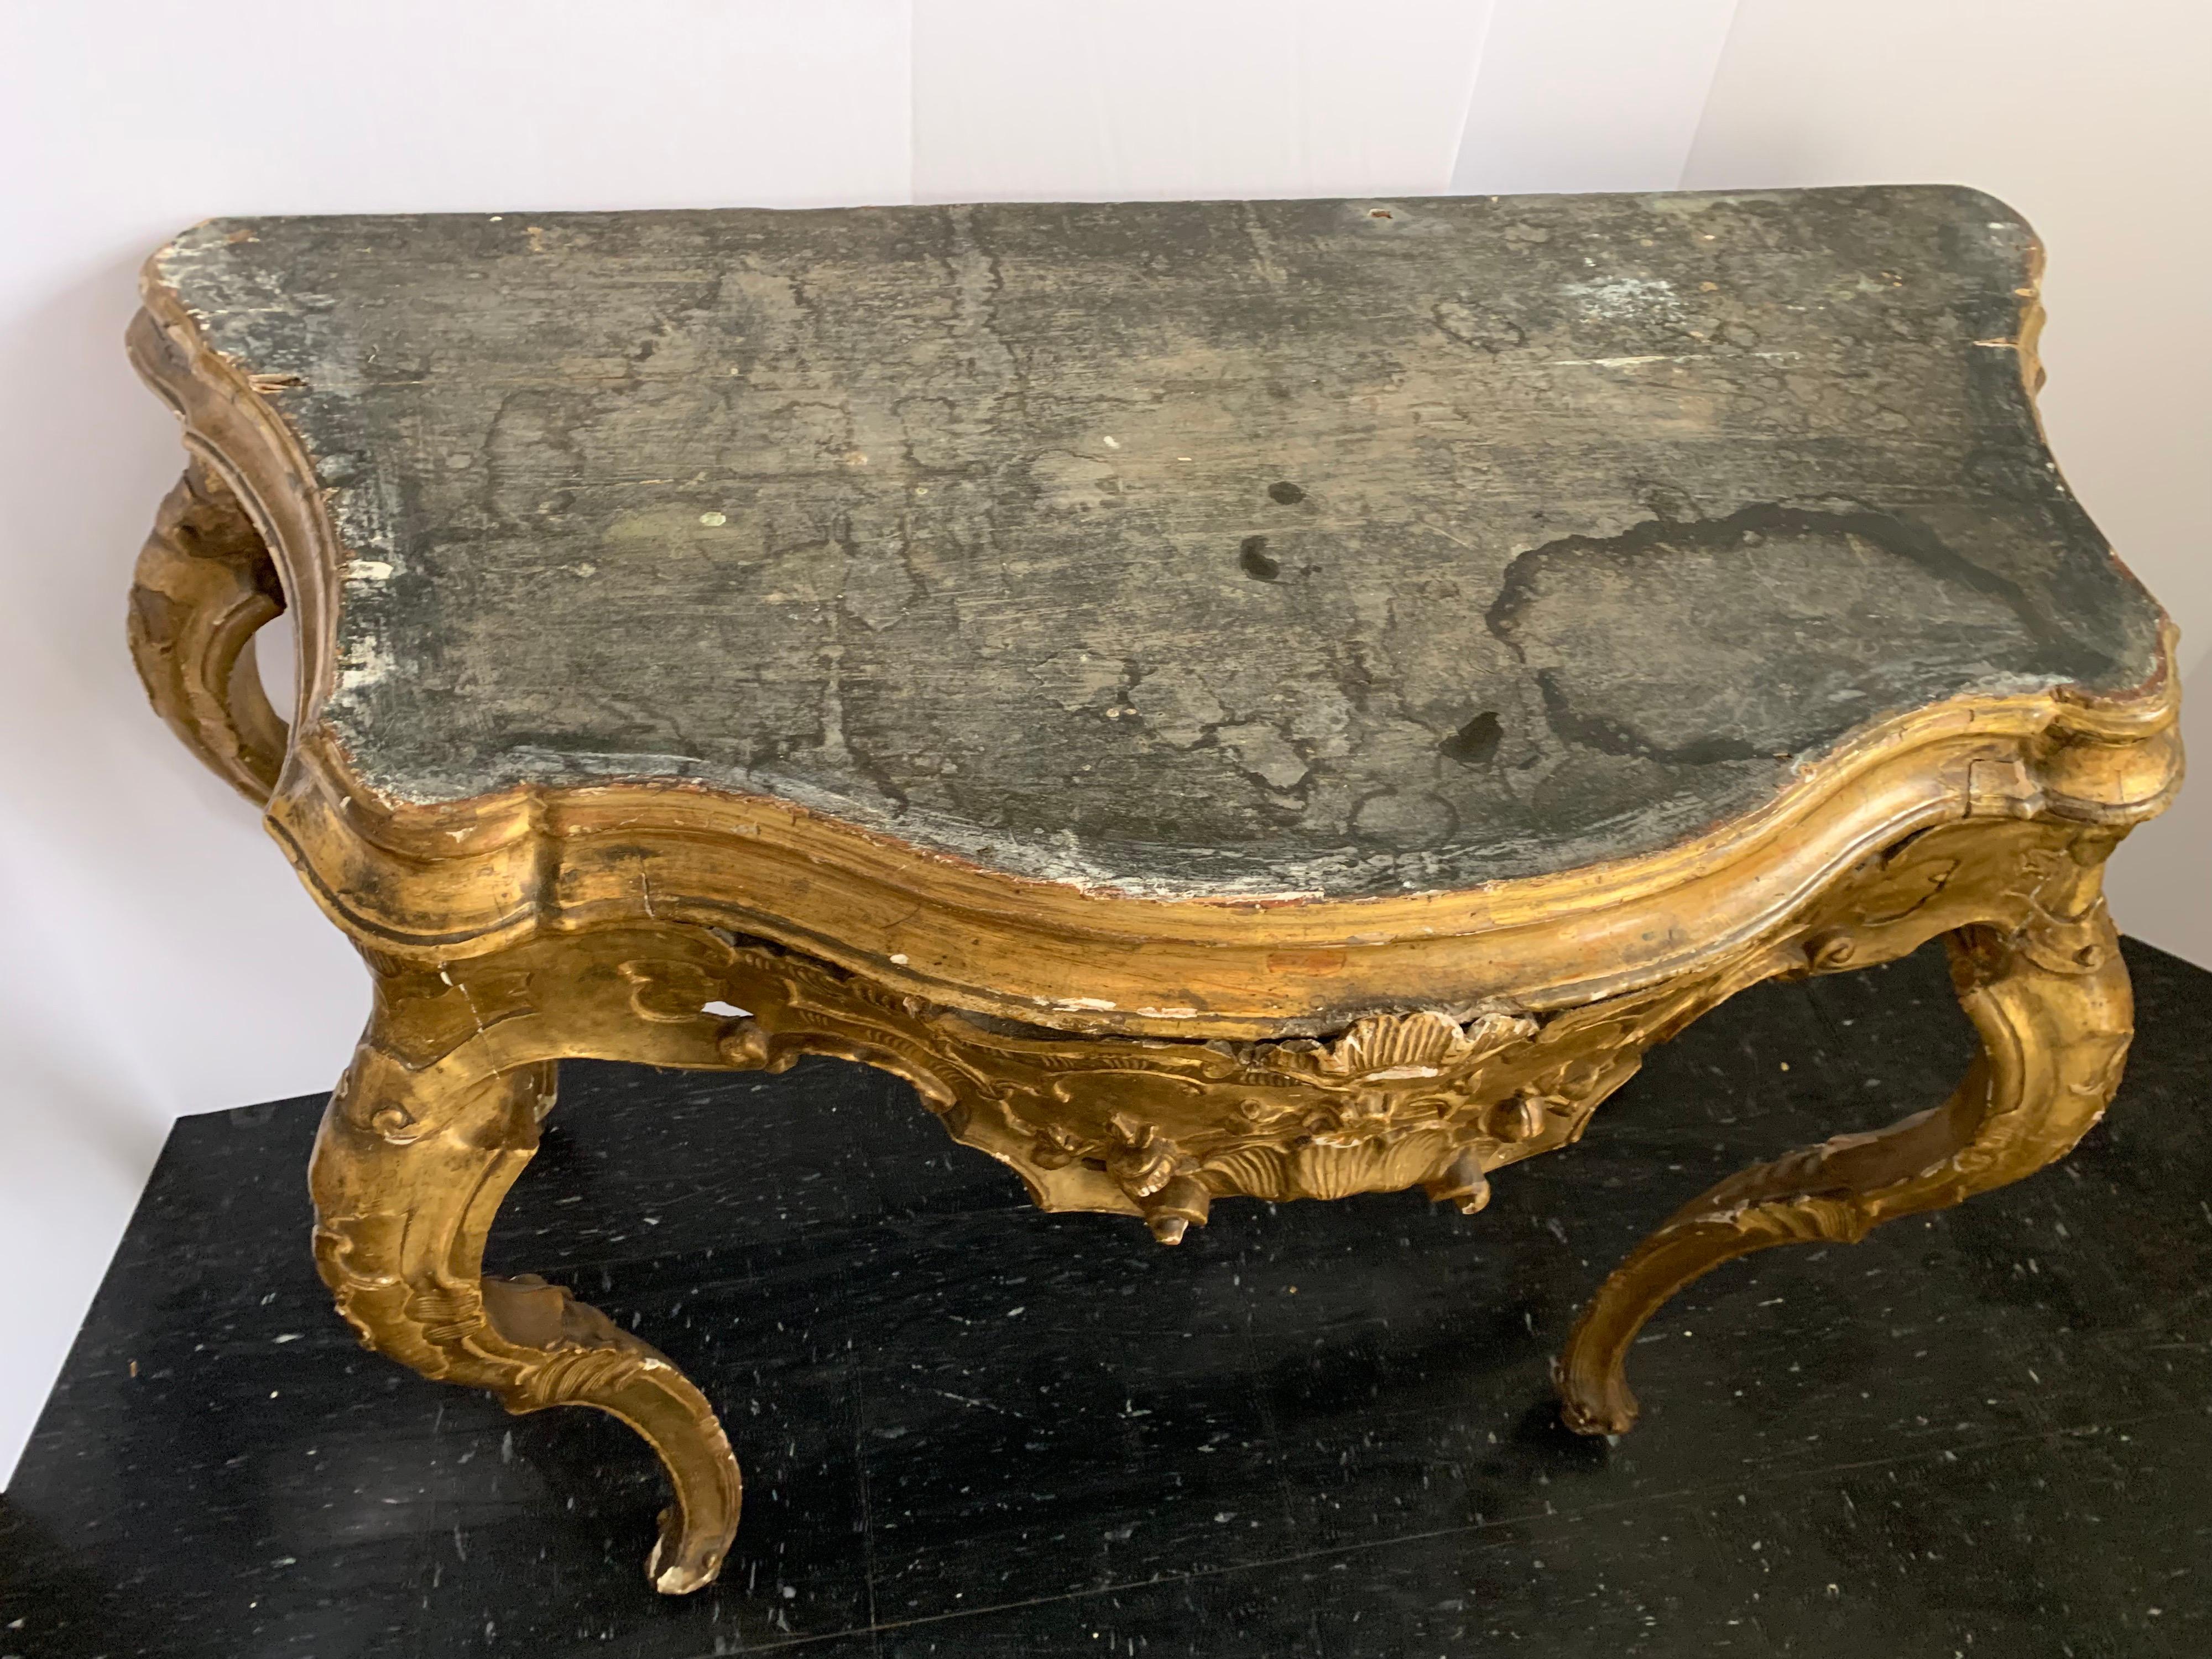 Finely wood carved Venetian console with gorgeous gilding. This is a dressy piece in any area of your home. It’s in great shape for its age as well.